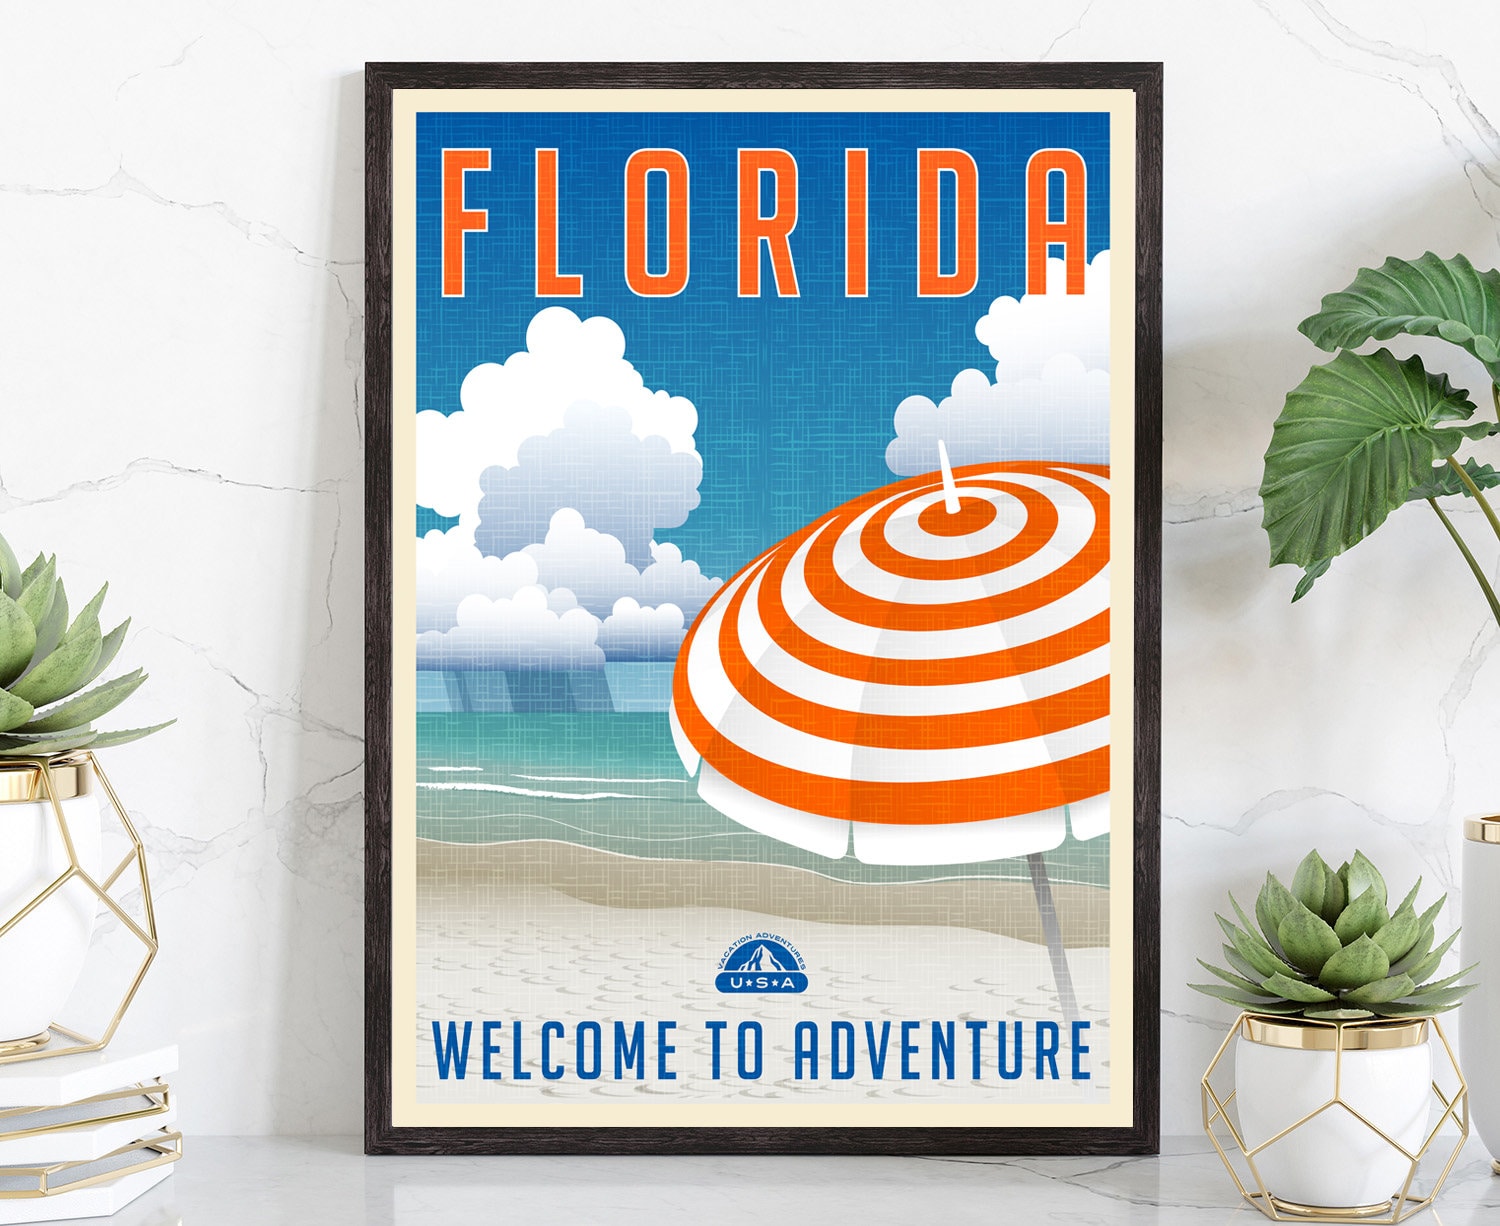 FLORIDA retro style travel poster, Florida vintage rustic poster print, Home wall art, Office wall decorations, Florida state map posters